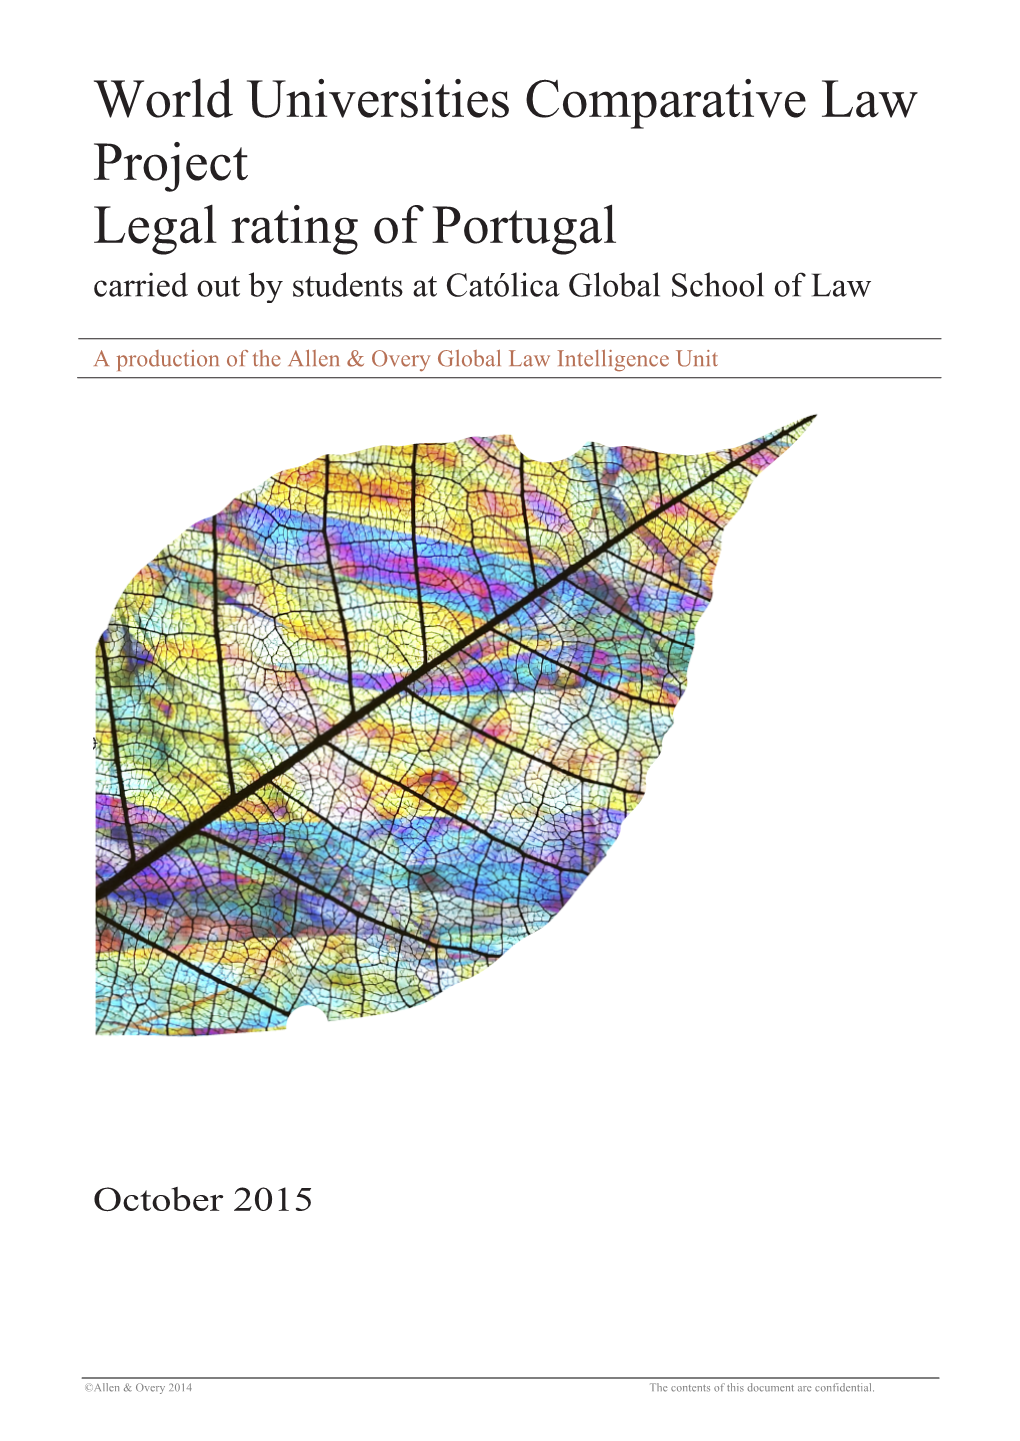 World Universities Comparative Law Project Legal Rating of Portugal Carried out by Students at Católica Global School of Law